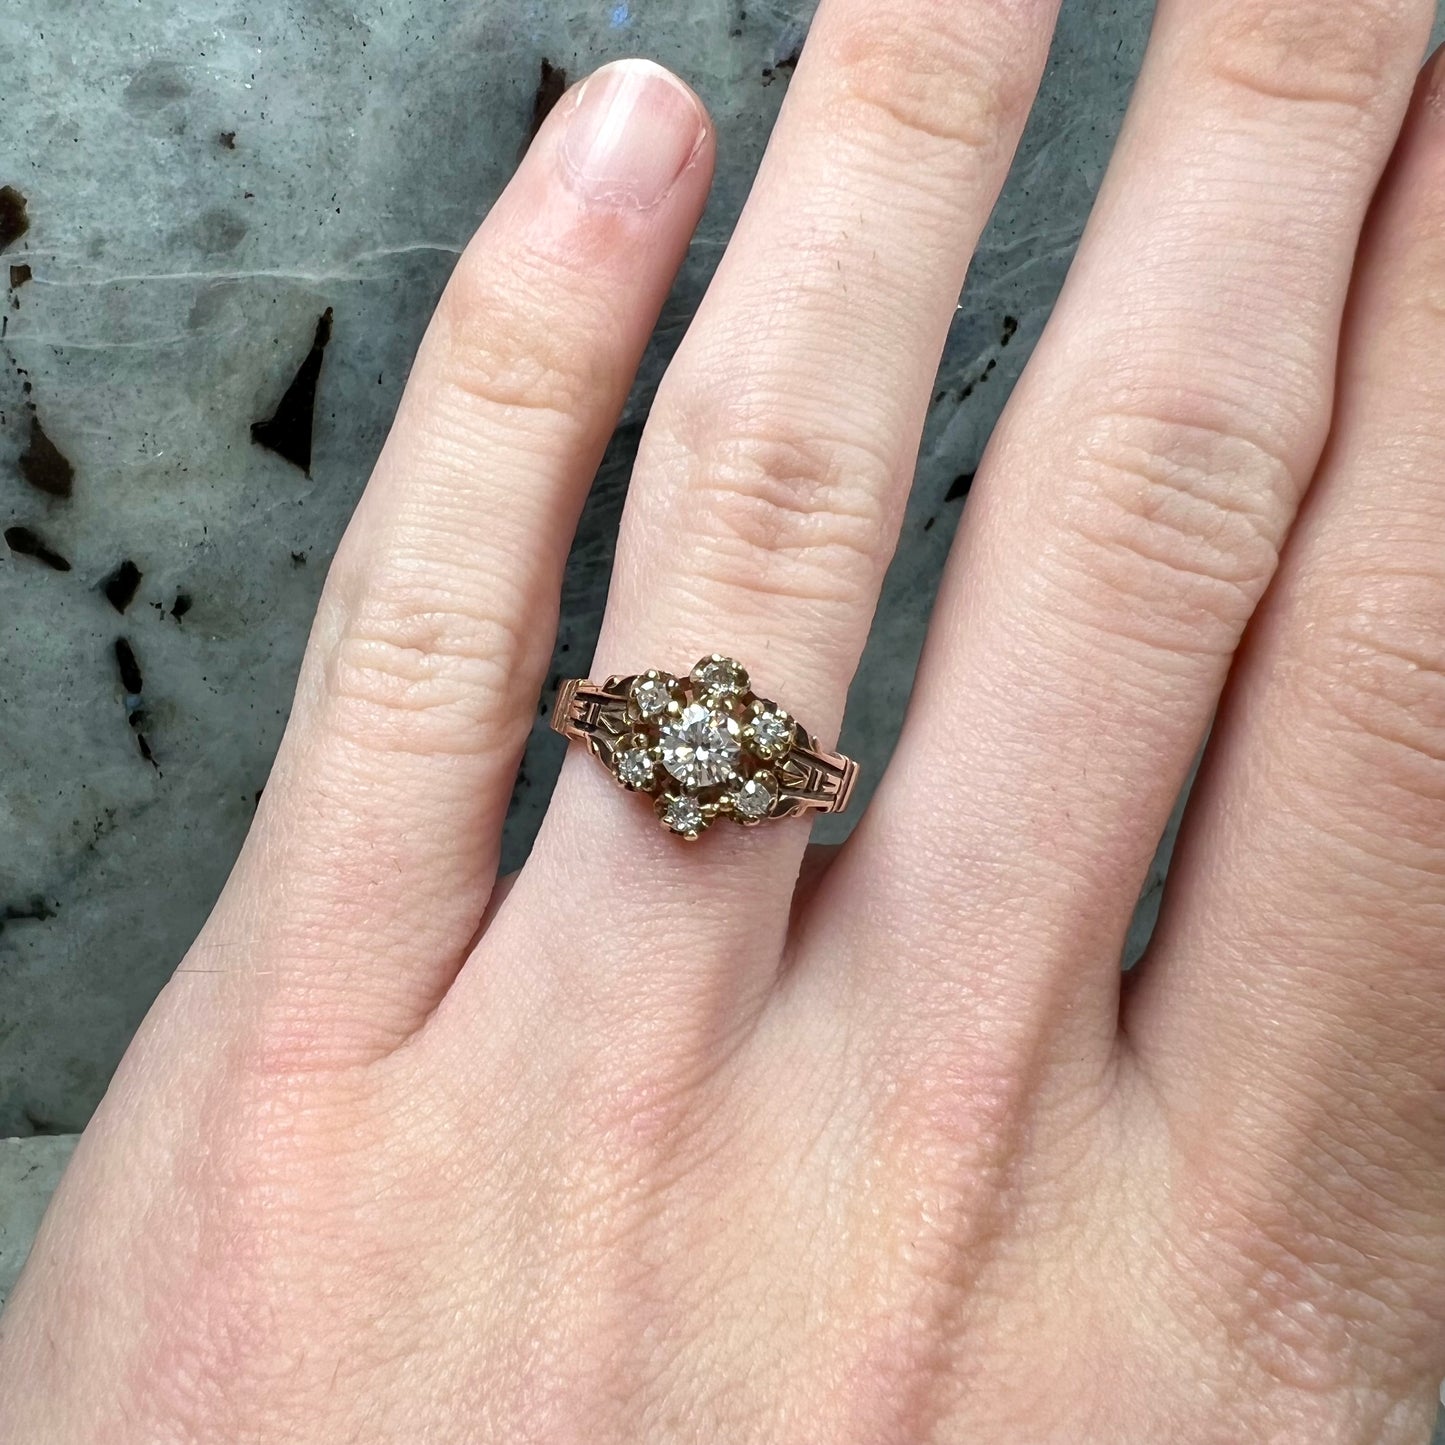 A modern Standard Round Brilliant Cut diamond set between six smaller round diamonds in an antique rose gold engagement ring setting.